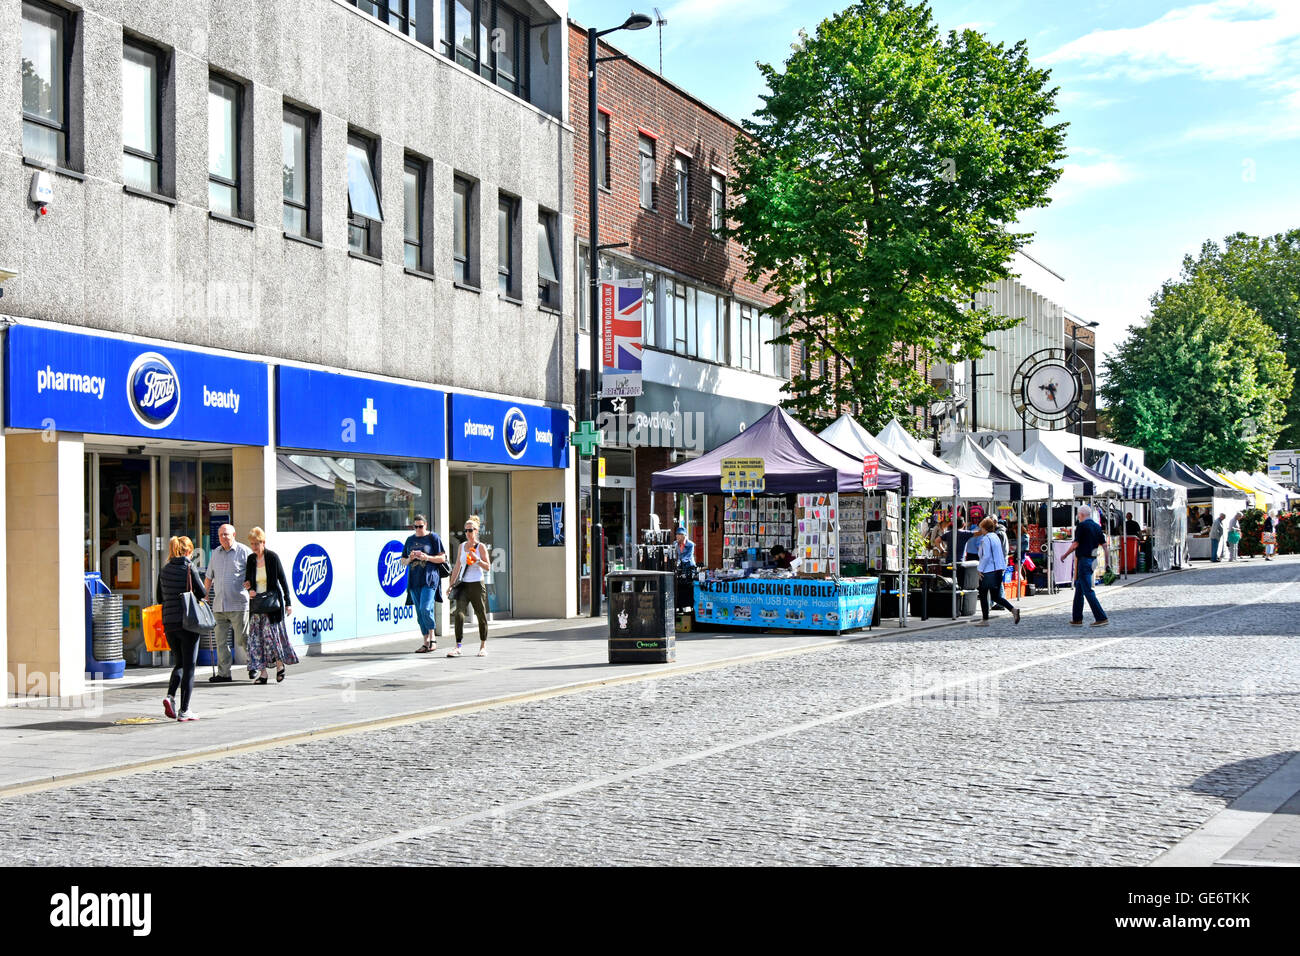 Street scene at Brentwood Essex England UK shopping High Street Boots pharmacy store and street market stalls beside cobblestone road Stock Photo